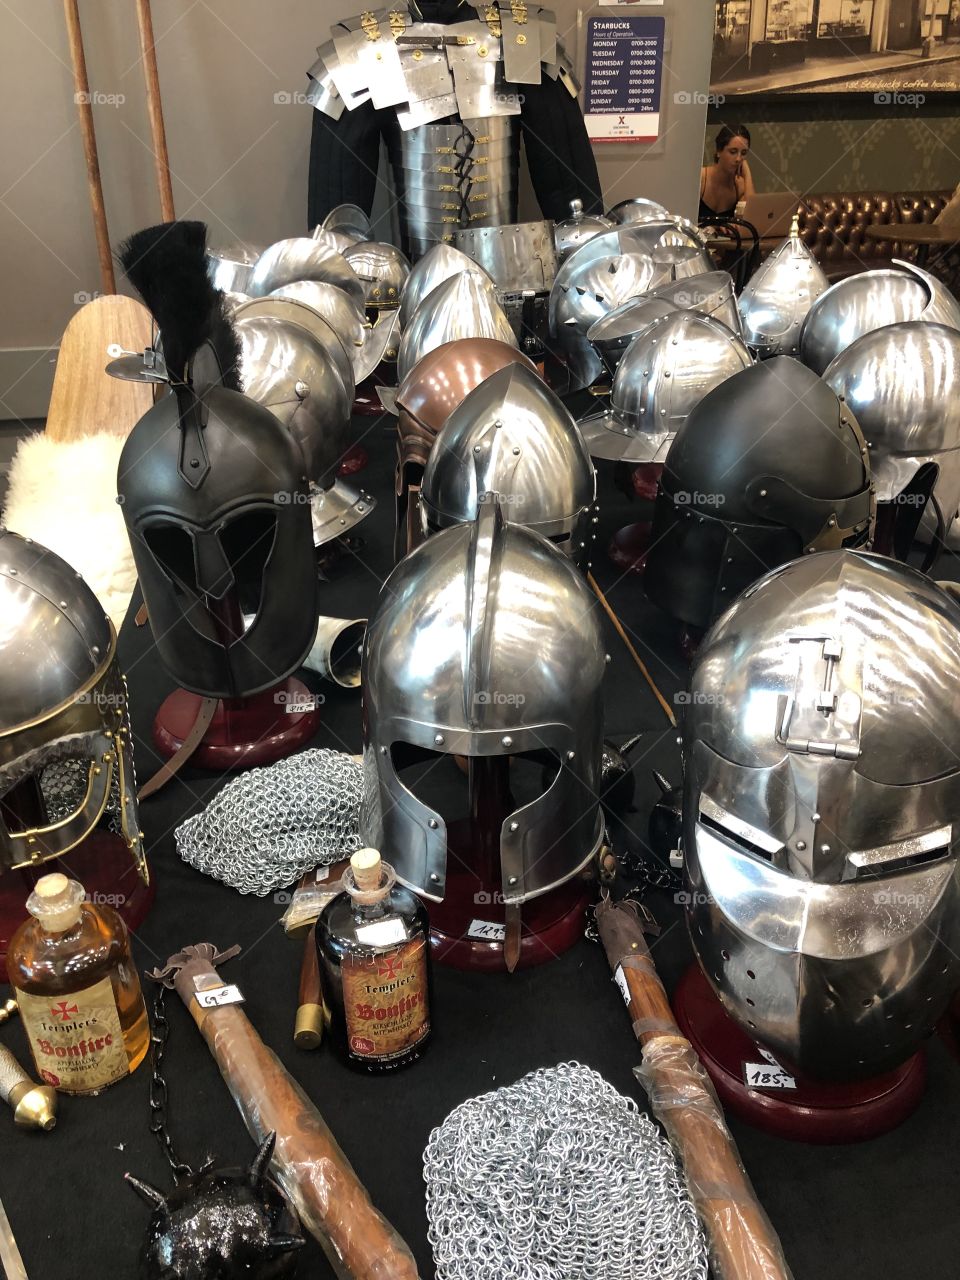 This was In a superstore , some amazing old fashion warrior helmets , some Spartan helmets to warrior helmets